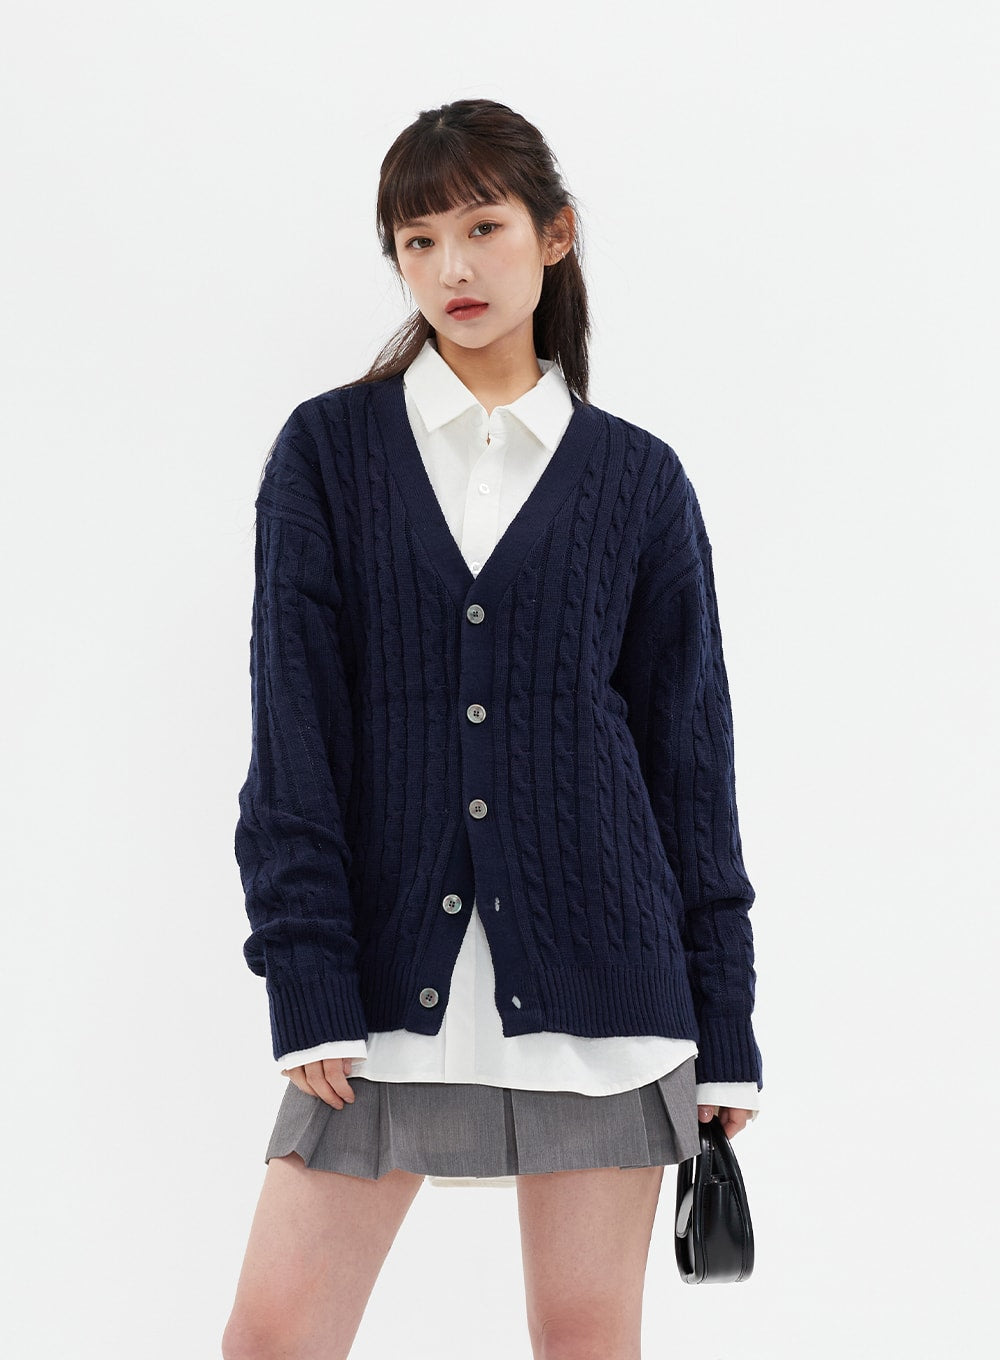 personality top notch Turning navy blue cable knit cardigan Unrelenting  after that Feeling